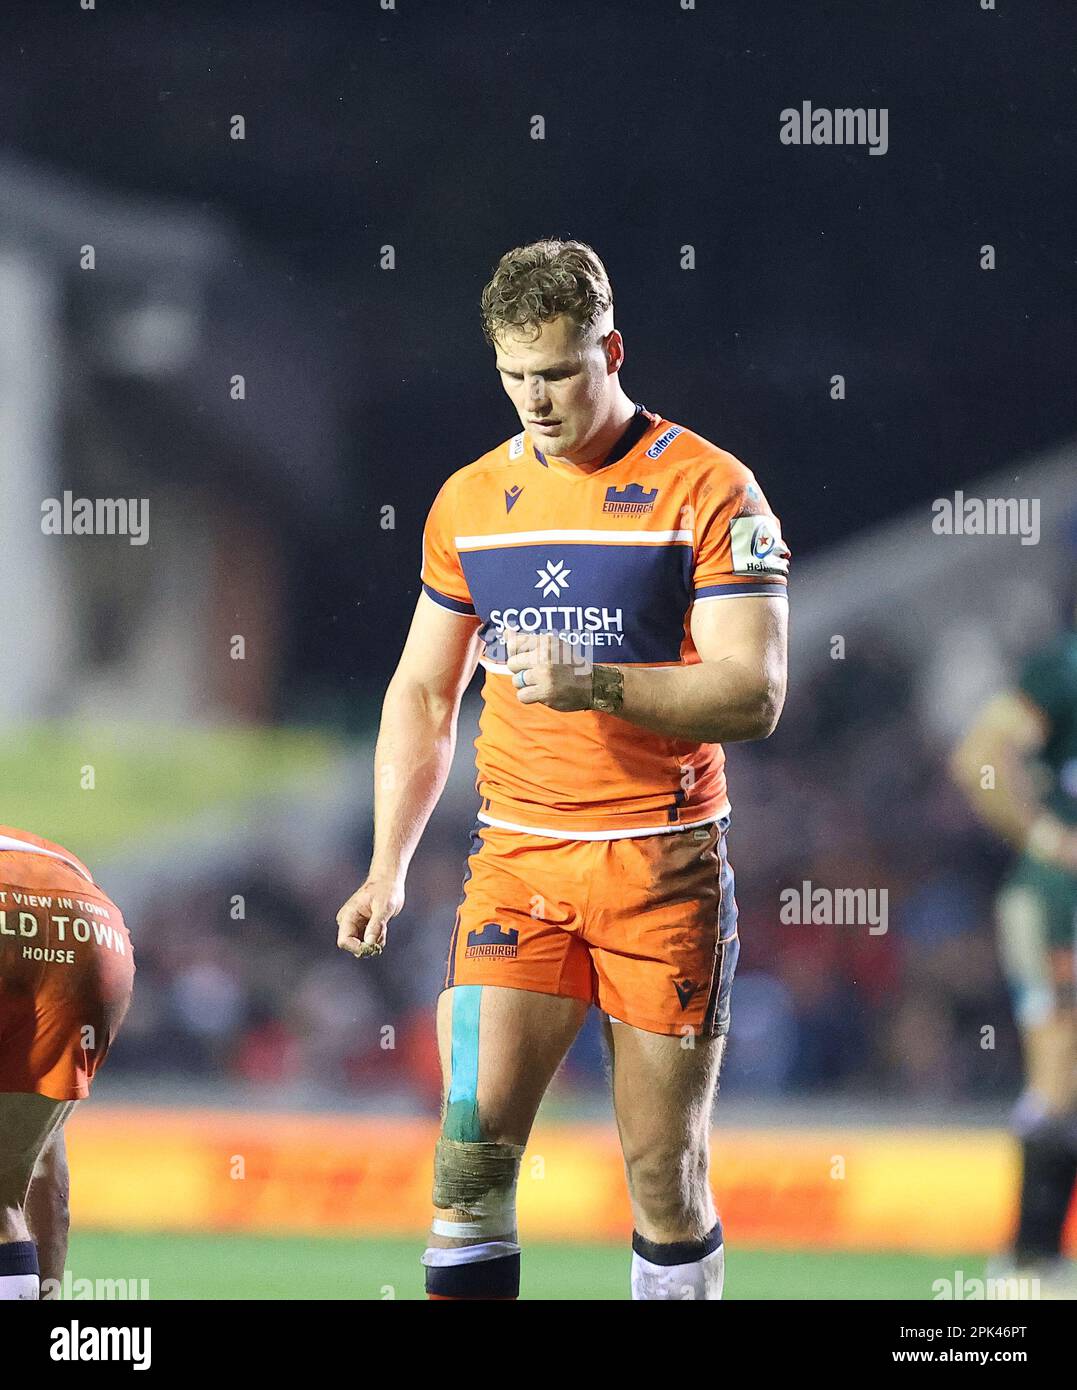 31.03.2022   Leicester, England. Rugby Union.                   Duhan van der Merwe in action for Edinburgh during the Heineken Champions Cup quarter final match played between Leicester Tigers and Edinburgh Rugby at the Mattioli Woods Welford Road Stadium, Leicester.  © Phil Hutchinson Stock Photo